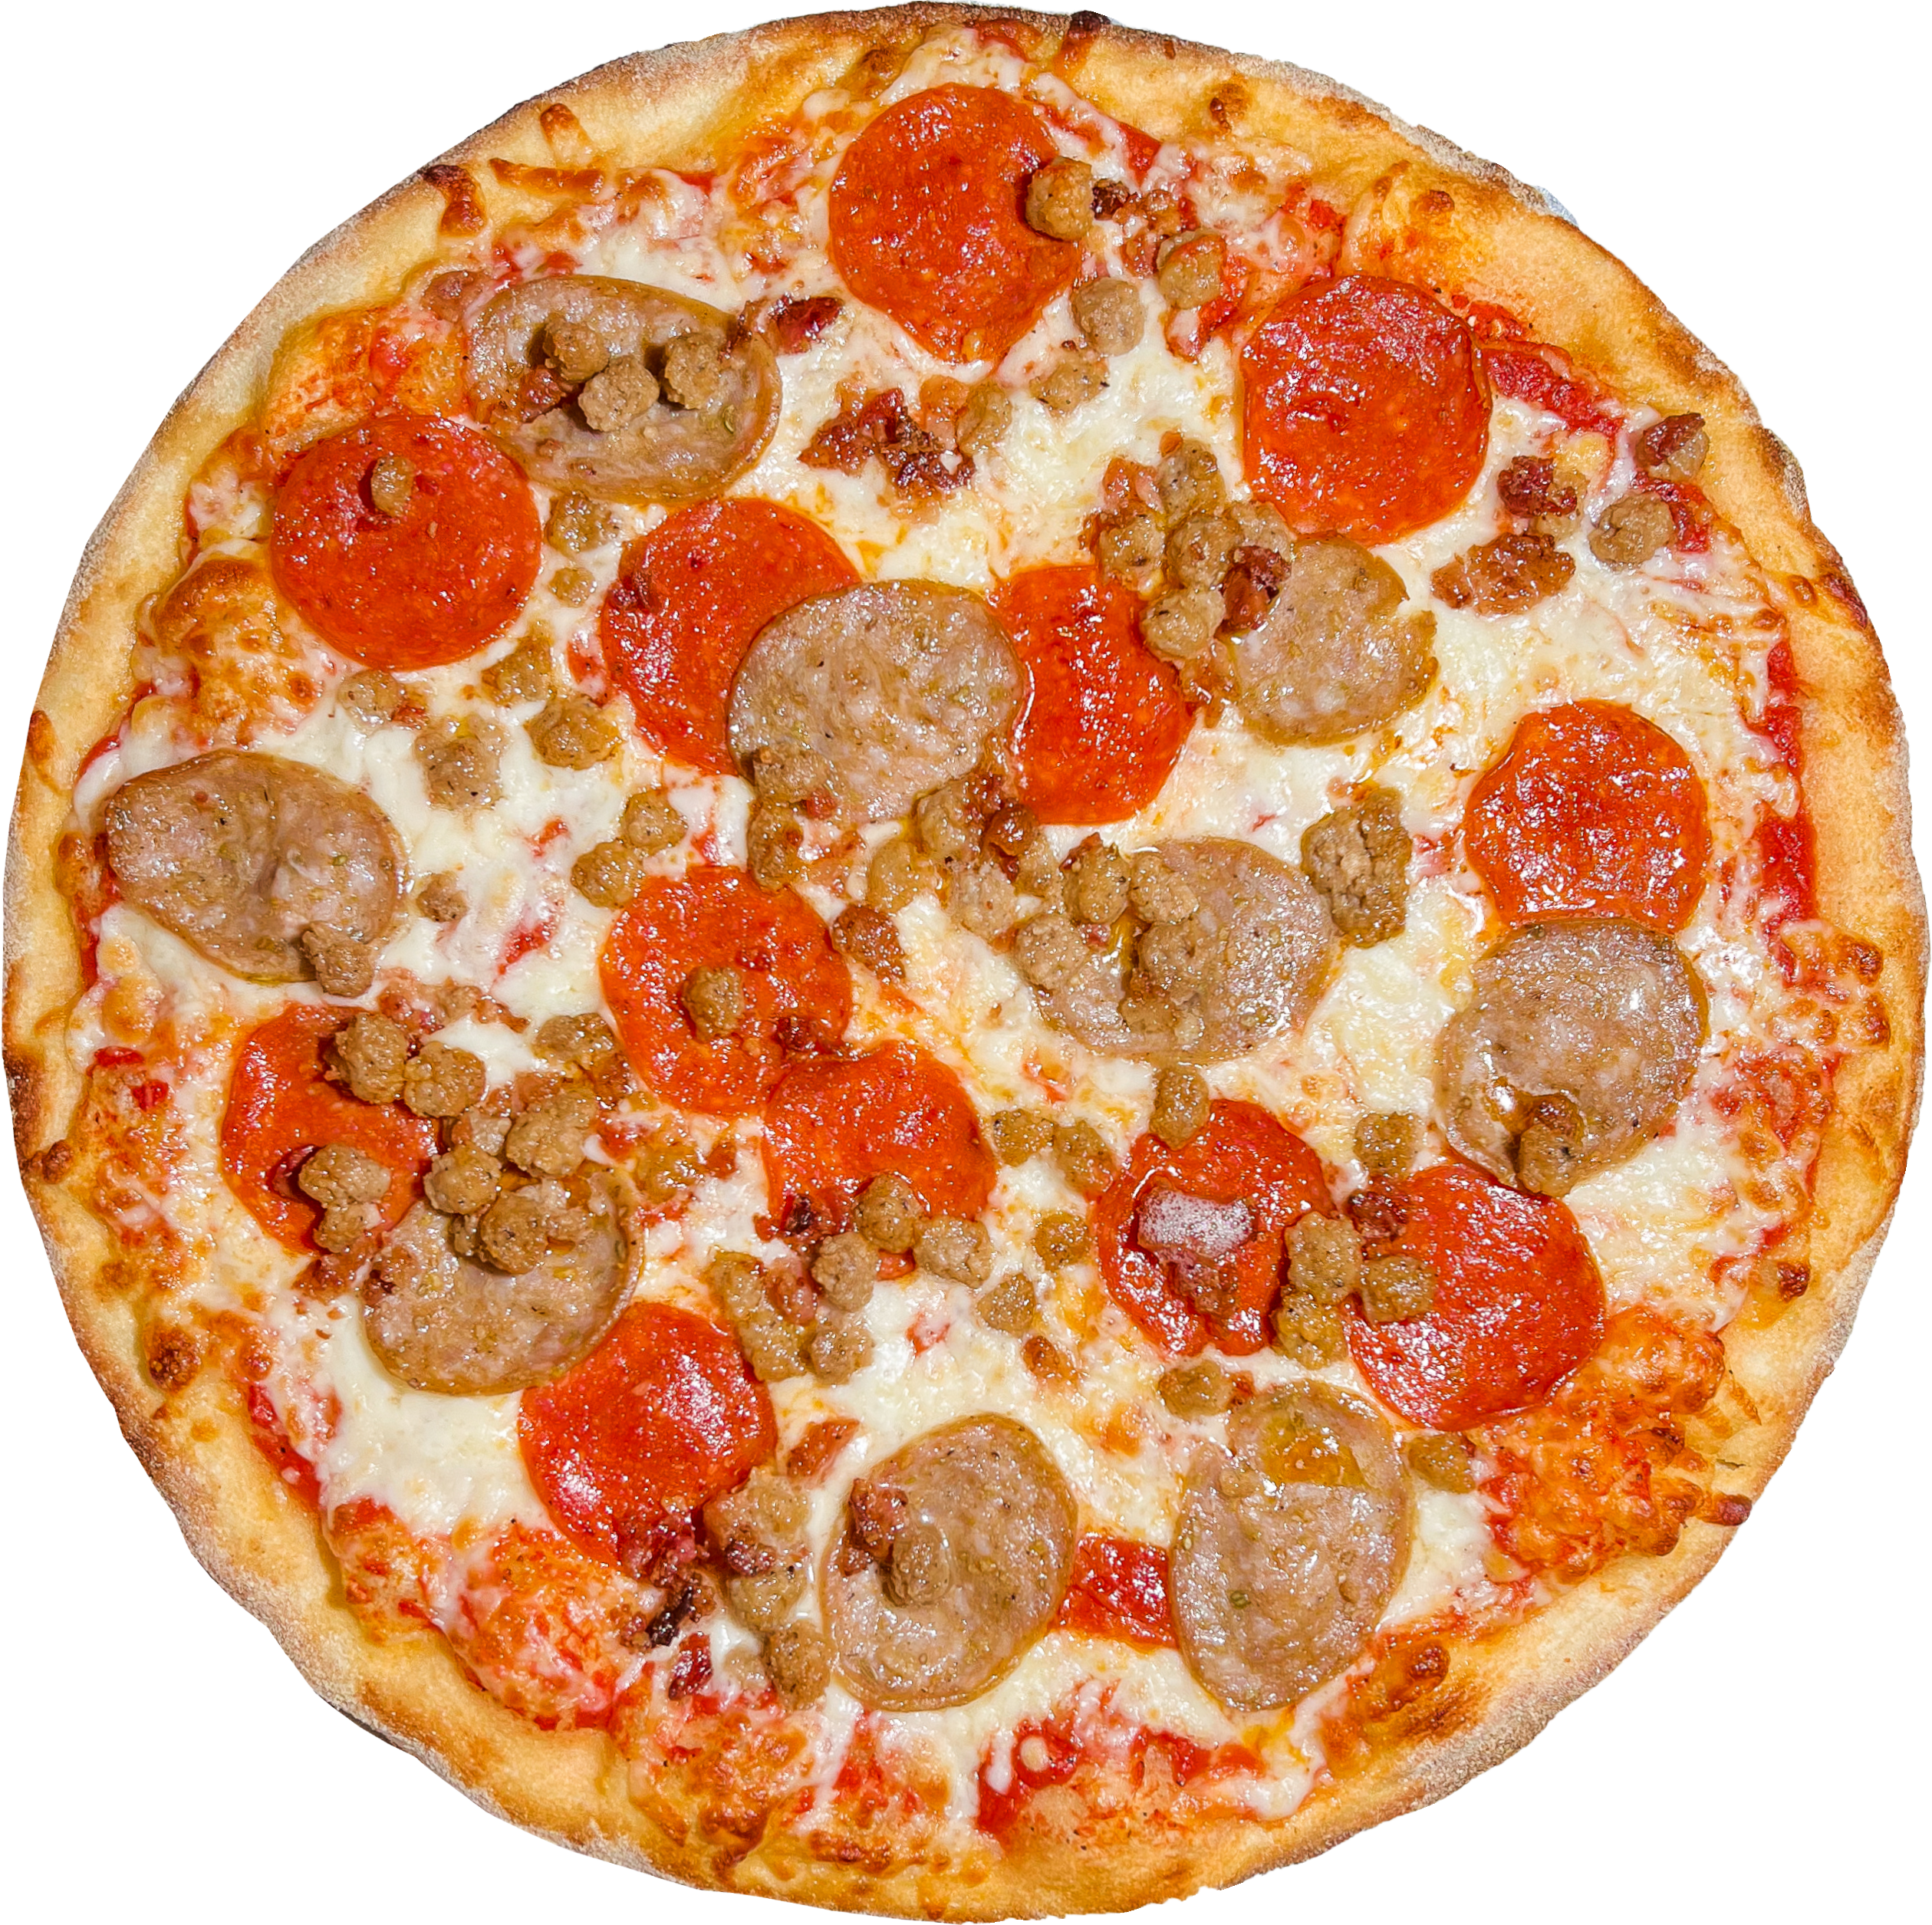 Meat Lover's Pizza S $18.95 L $20.95 XL $24.95